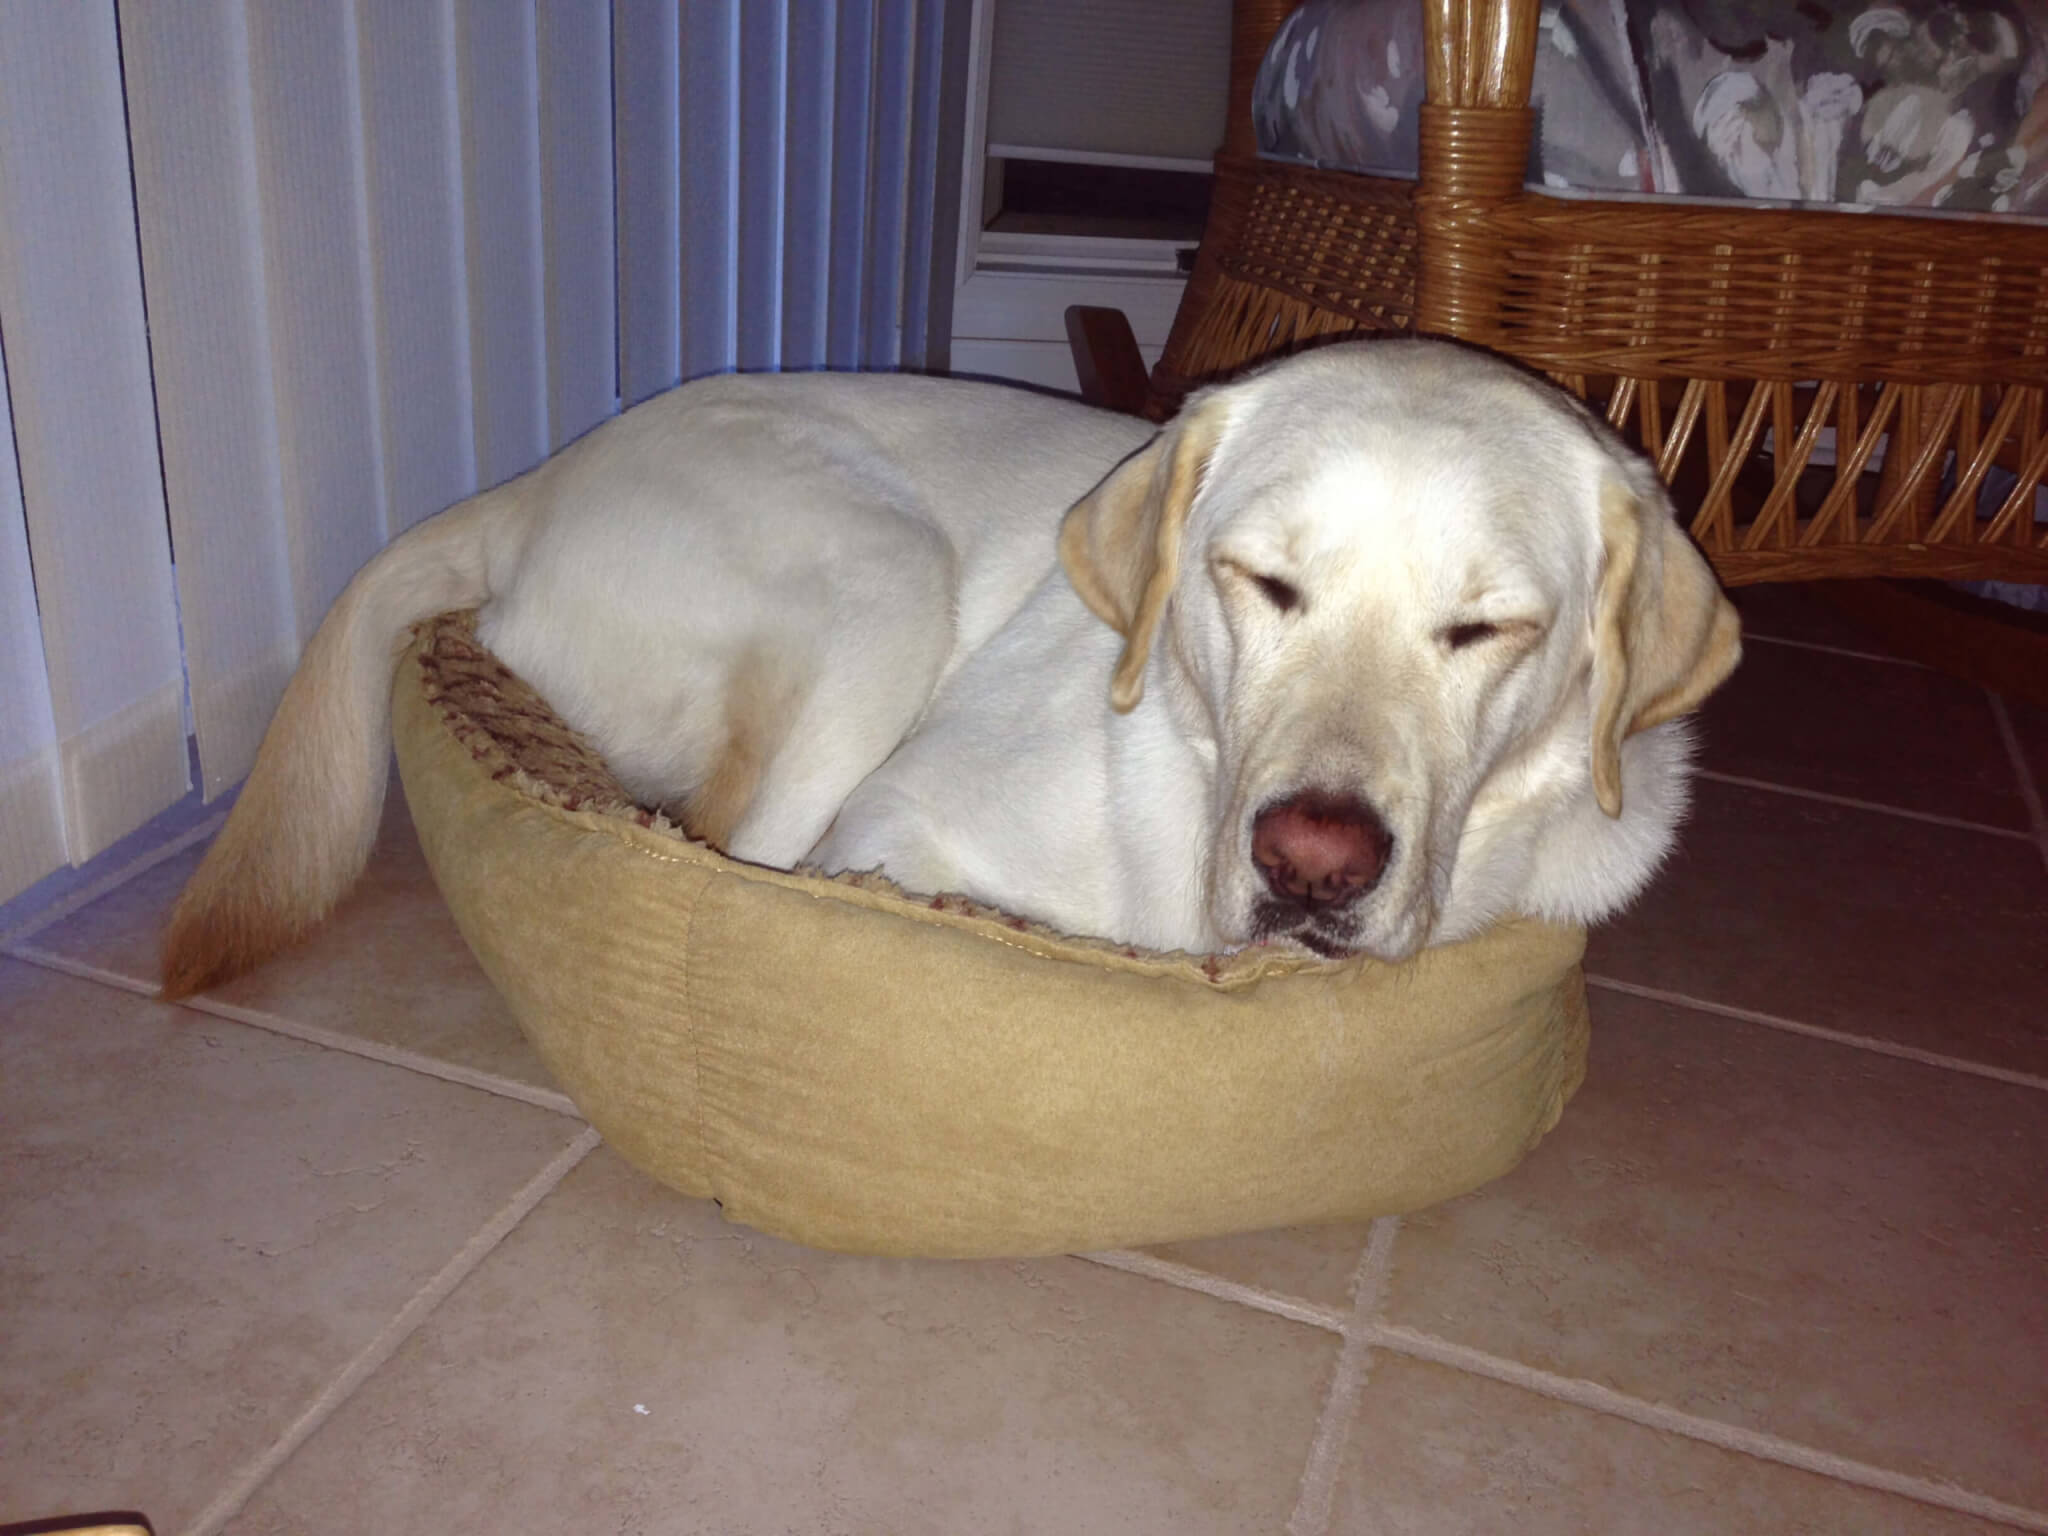 Guiding Eyes Alberta falls asleep in a tiny cat bed while visiting relatives over the holidays.